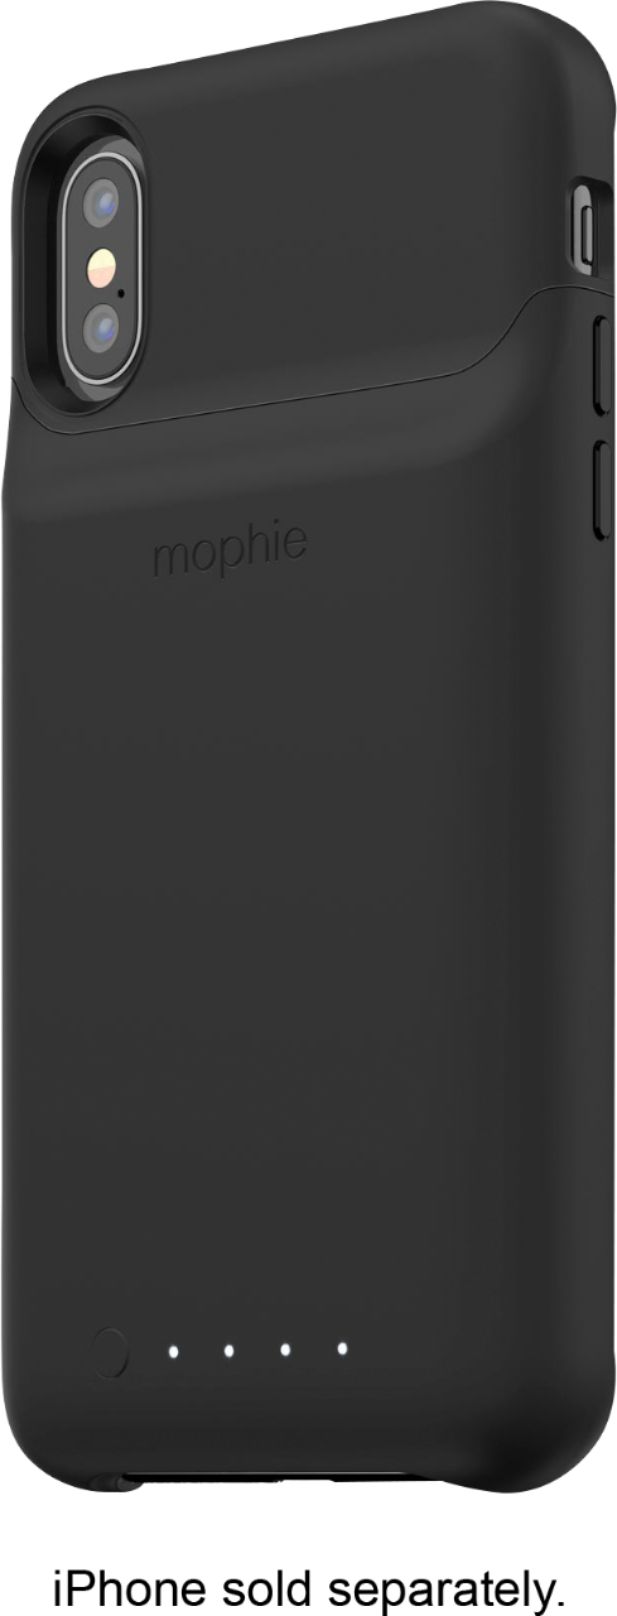 OEM Mophie Juice Pack Access Battery Case for iPhone XS Max - Black